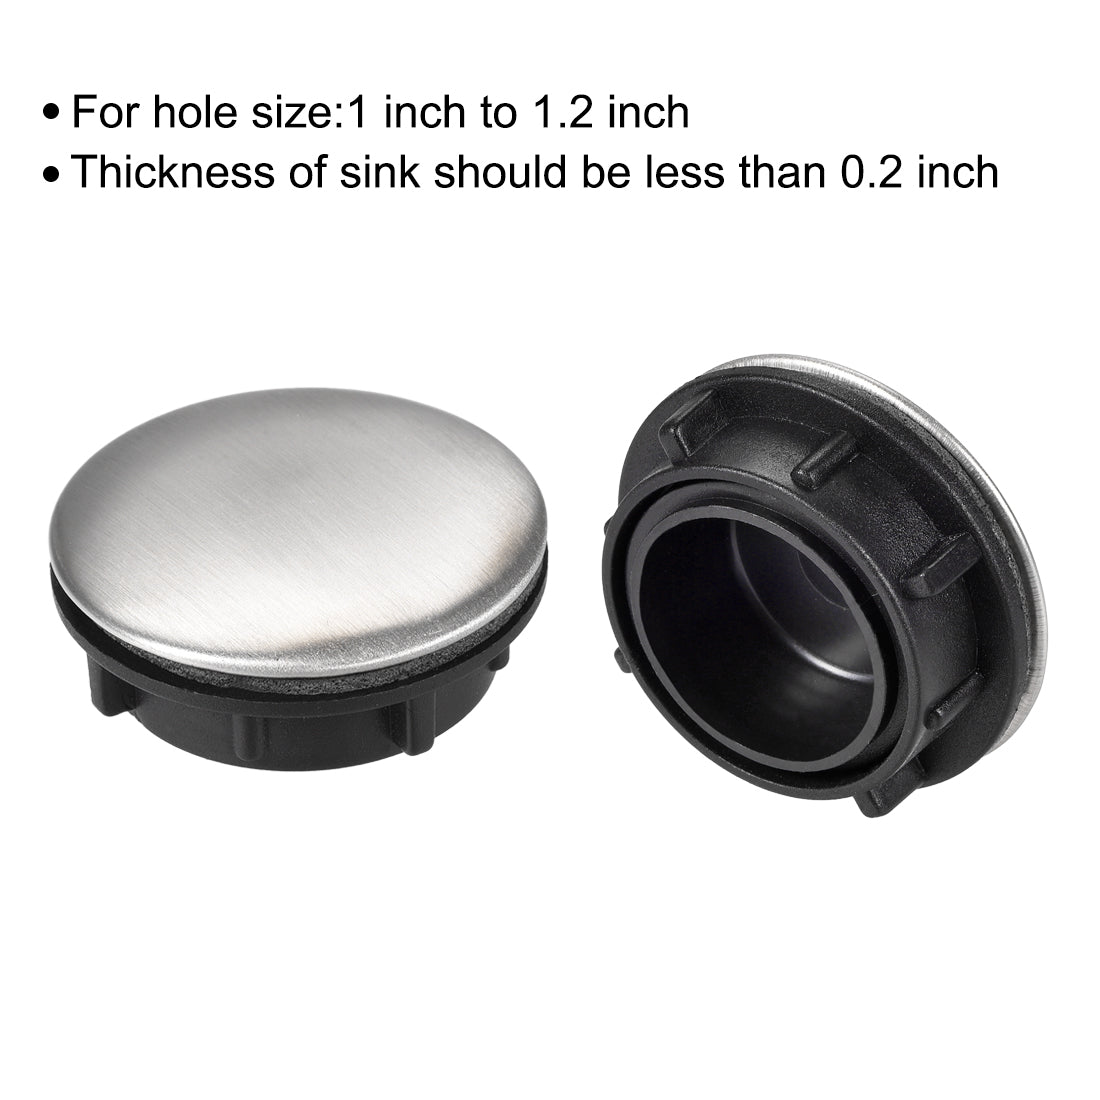 uxcell Uxcell Faucet Hole Cover for Dia 1 to 1.2 Inch, Kitchen Sink Tap Hole Cover 304 Stainless Steel, 2 Pcs